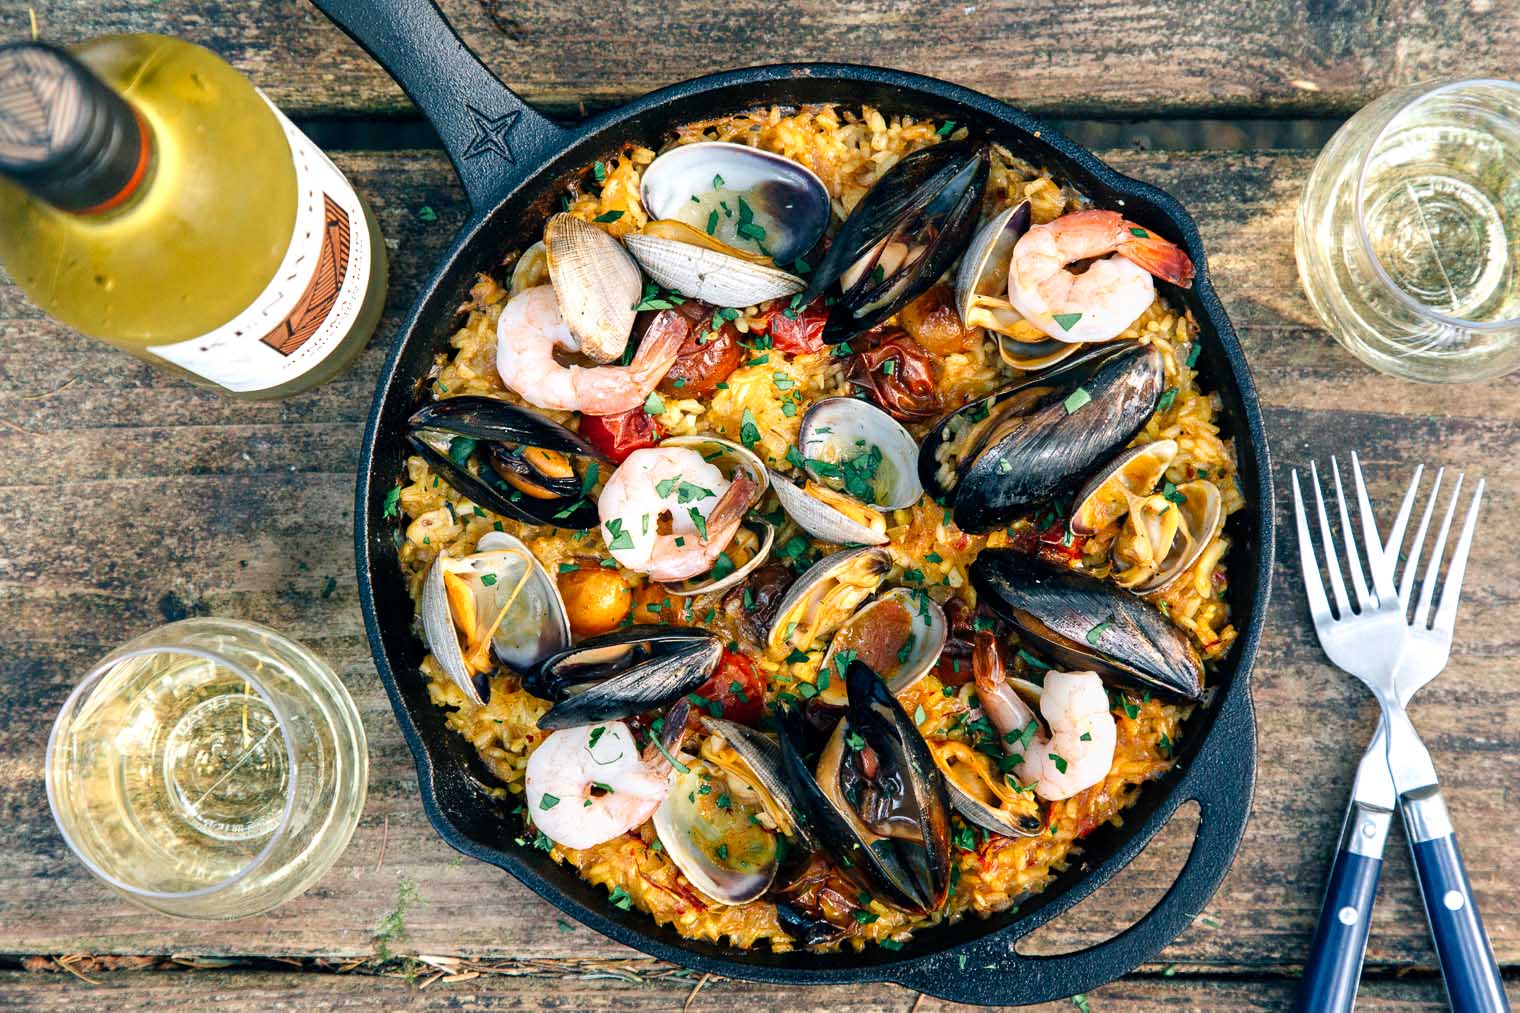 🌮 Most People Can’t Match 16/24 of These Foods to Their Country on a Map – Can You? Seafood Paella